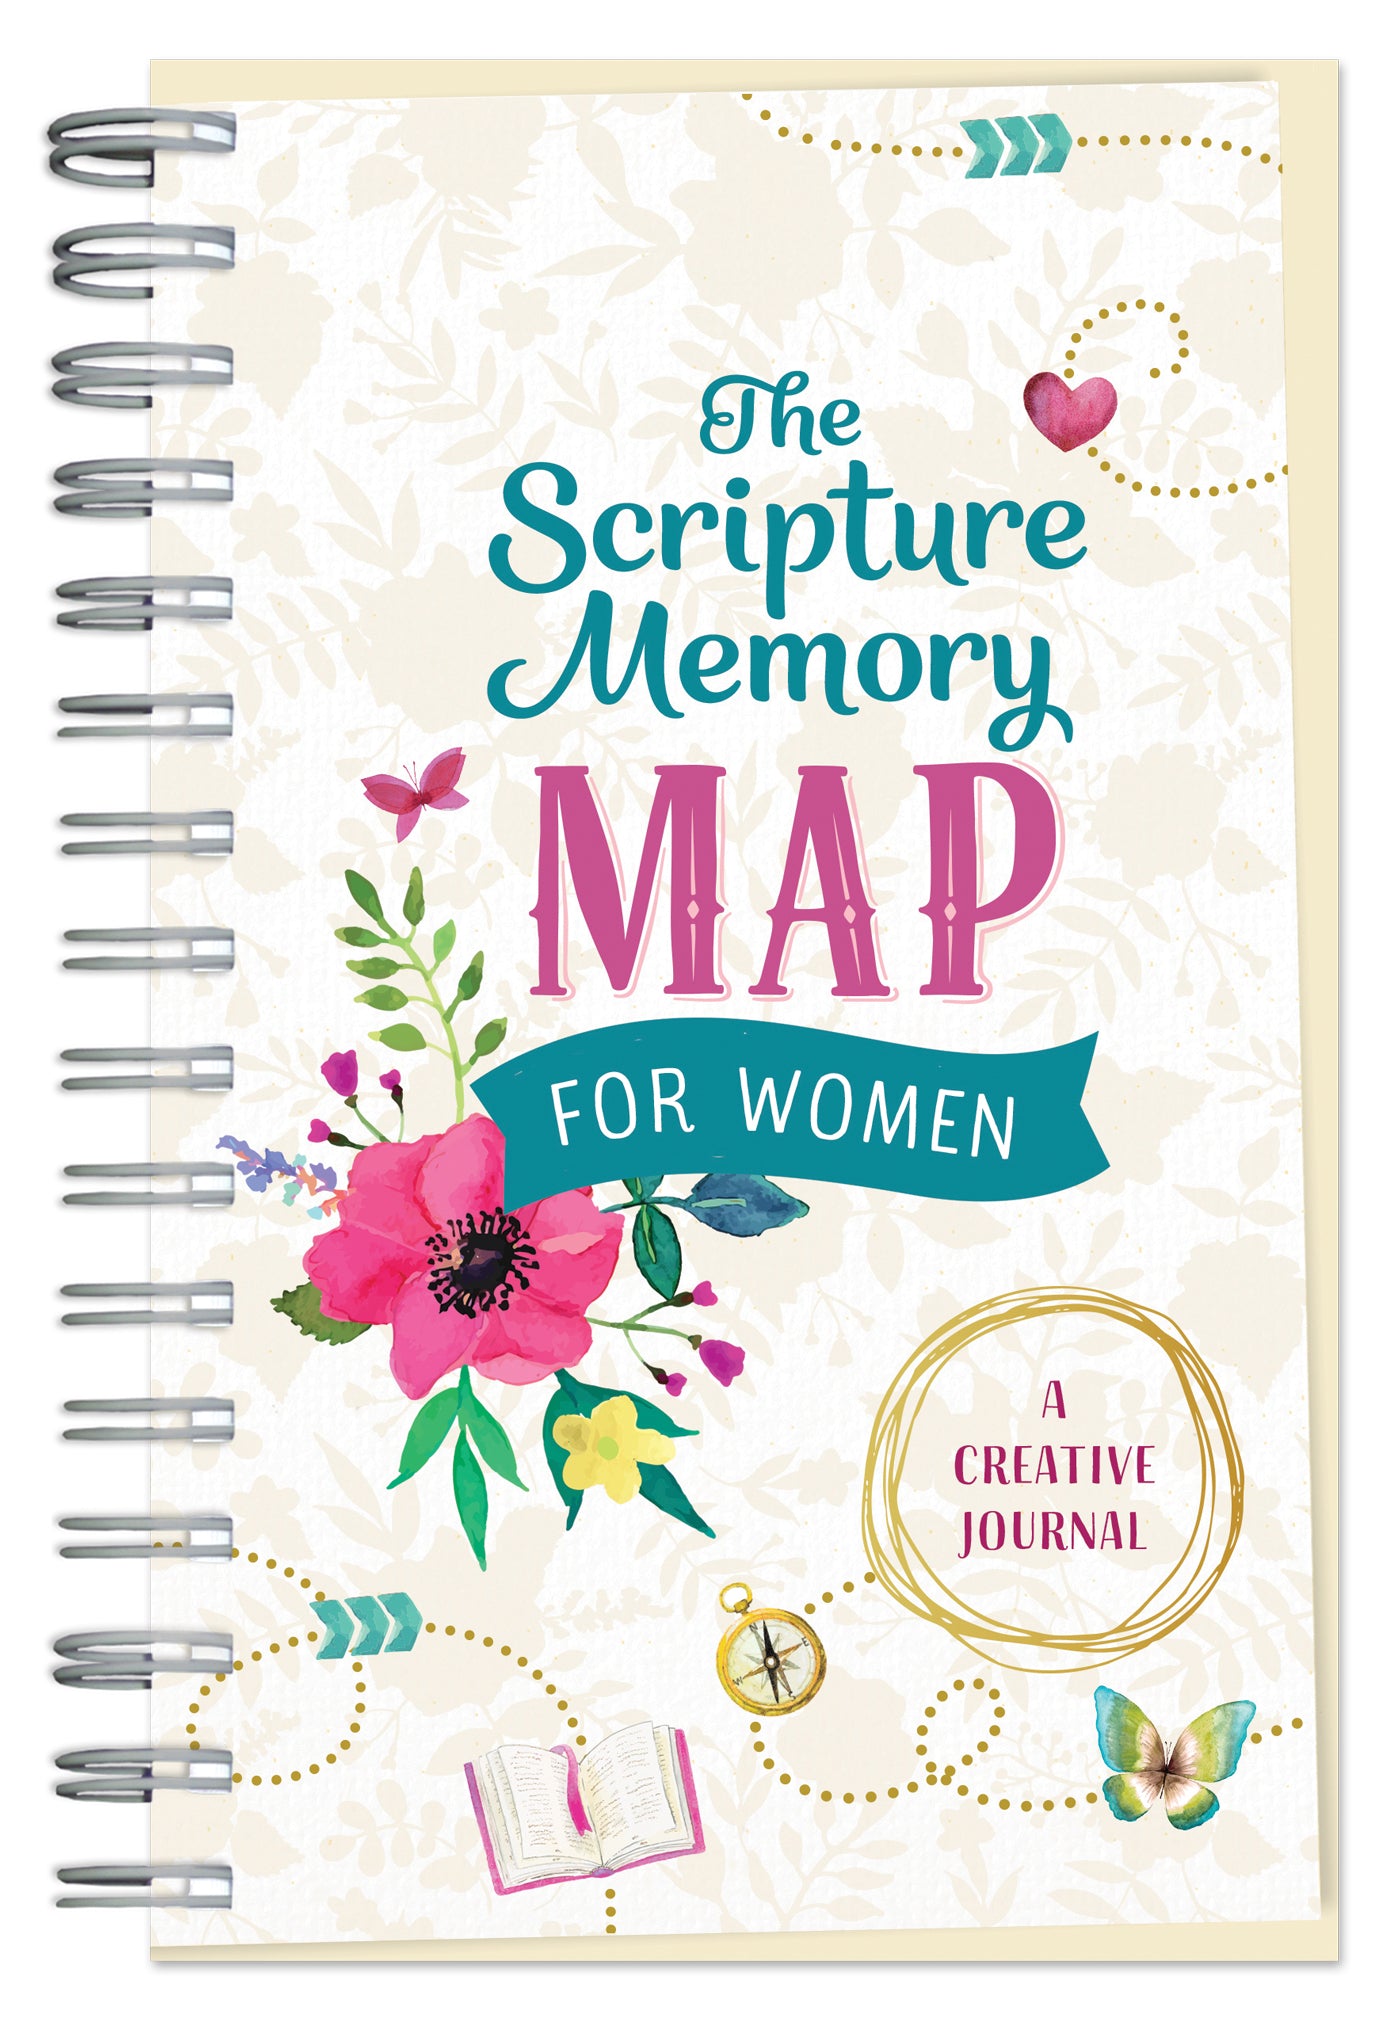 Image of The Scripture Memory Map for Women other